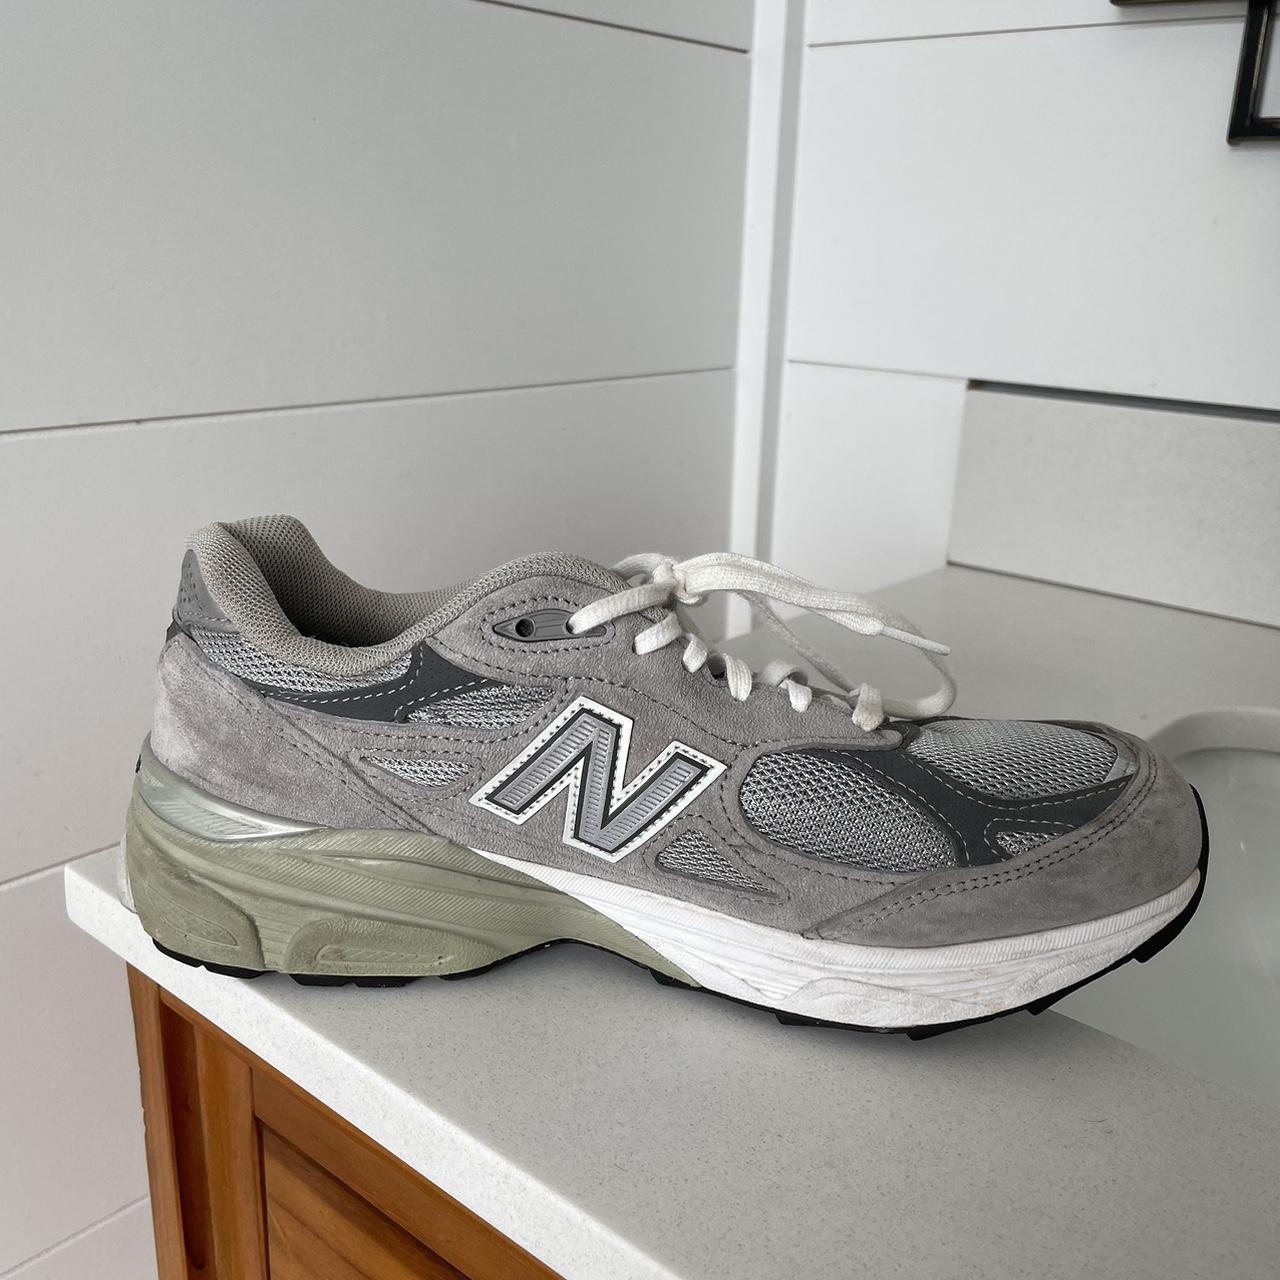 New Balance Women's Grey and White Trainers (3)